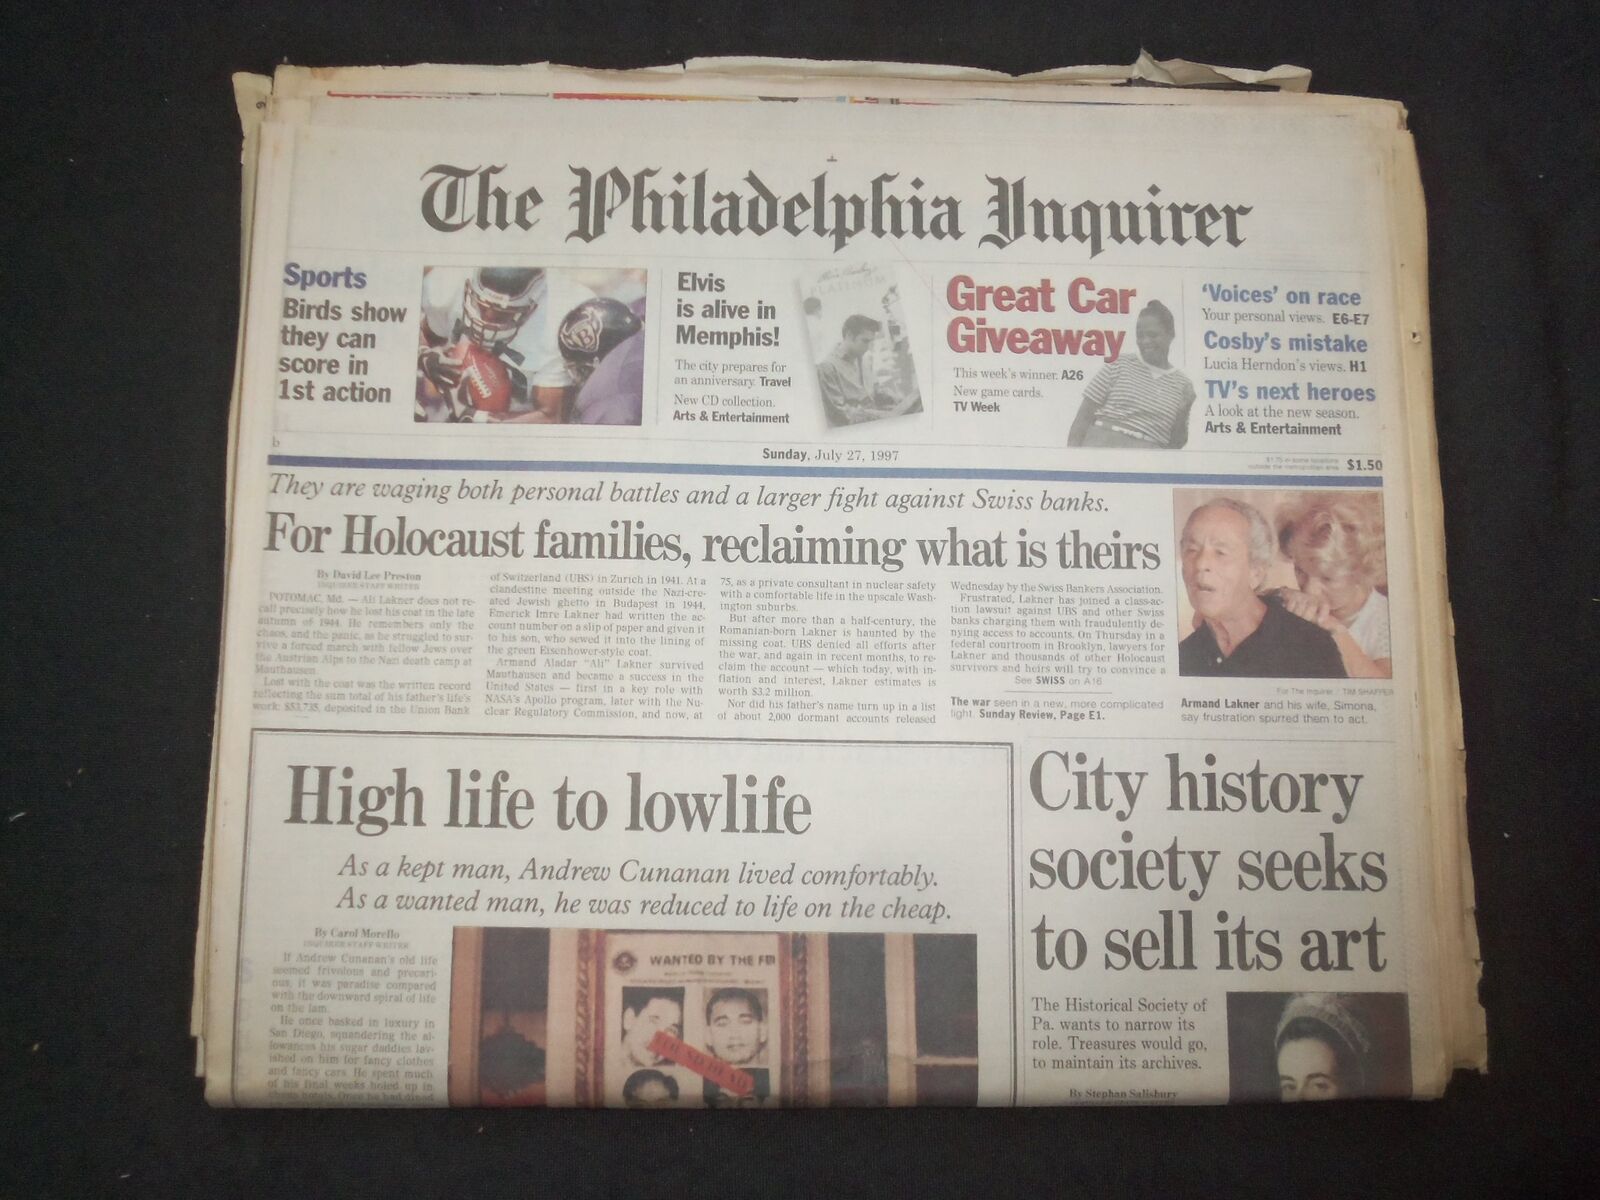 1997 JULY 27 PHILADELPHIA INQUIRER-HOLOCAUST FAMILIES RECLAIMING THEIRS- NP 7442